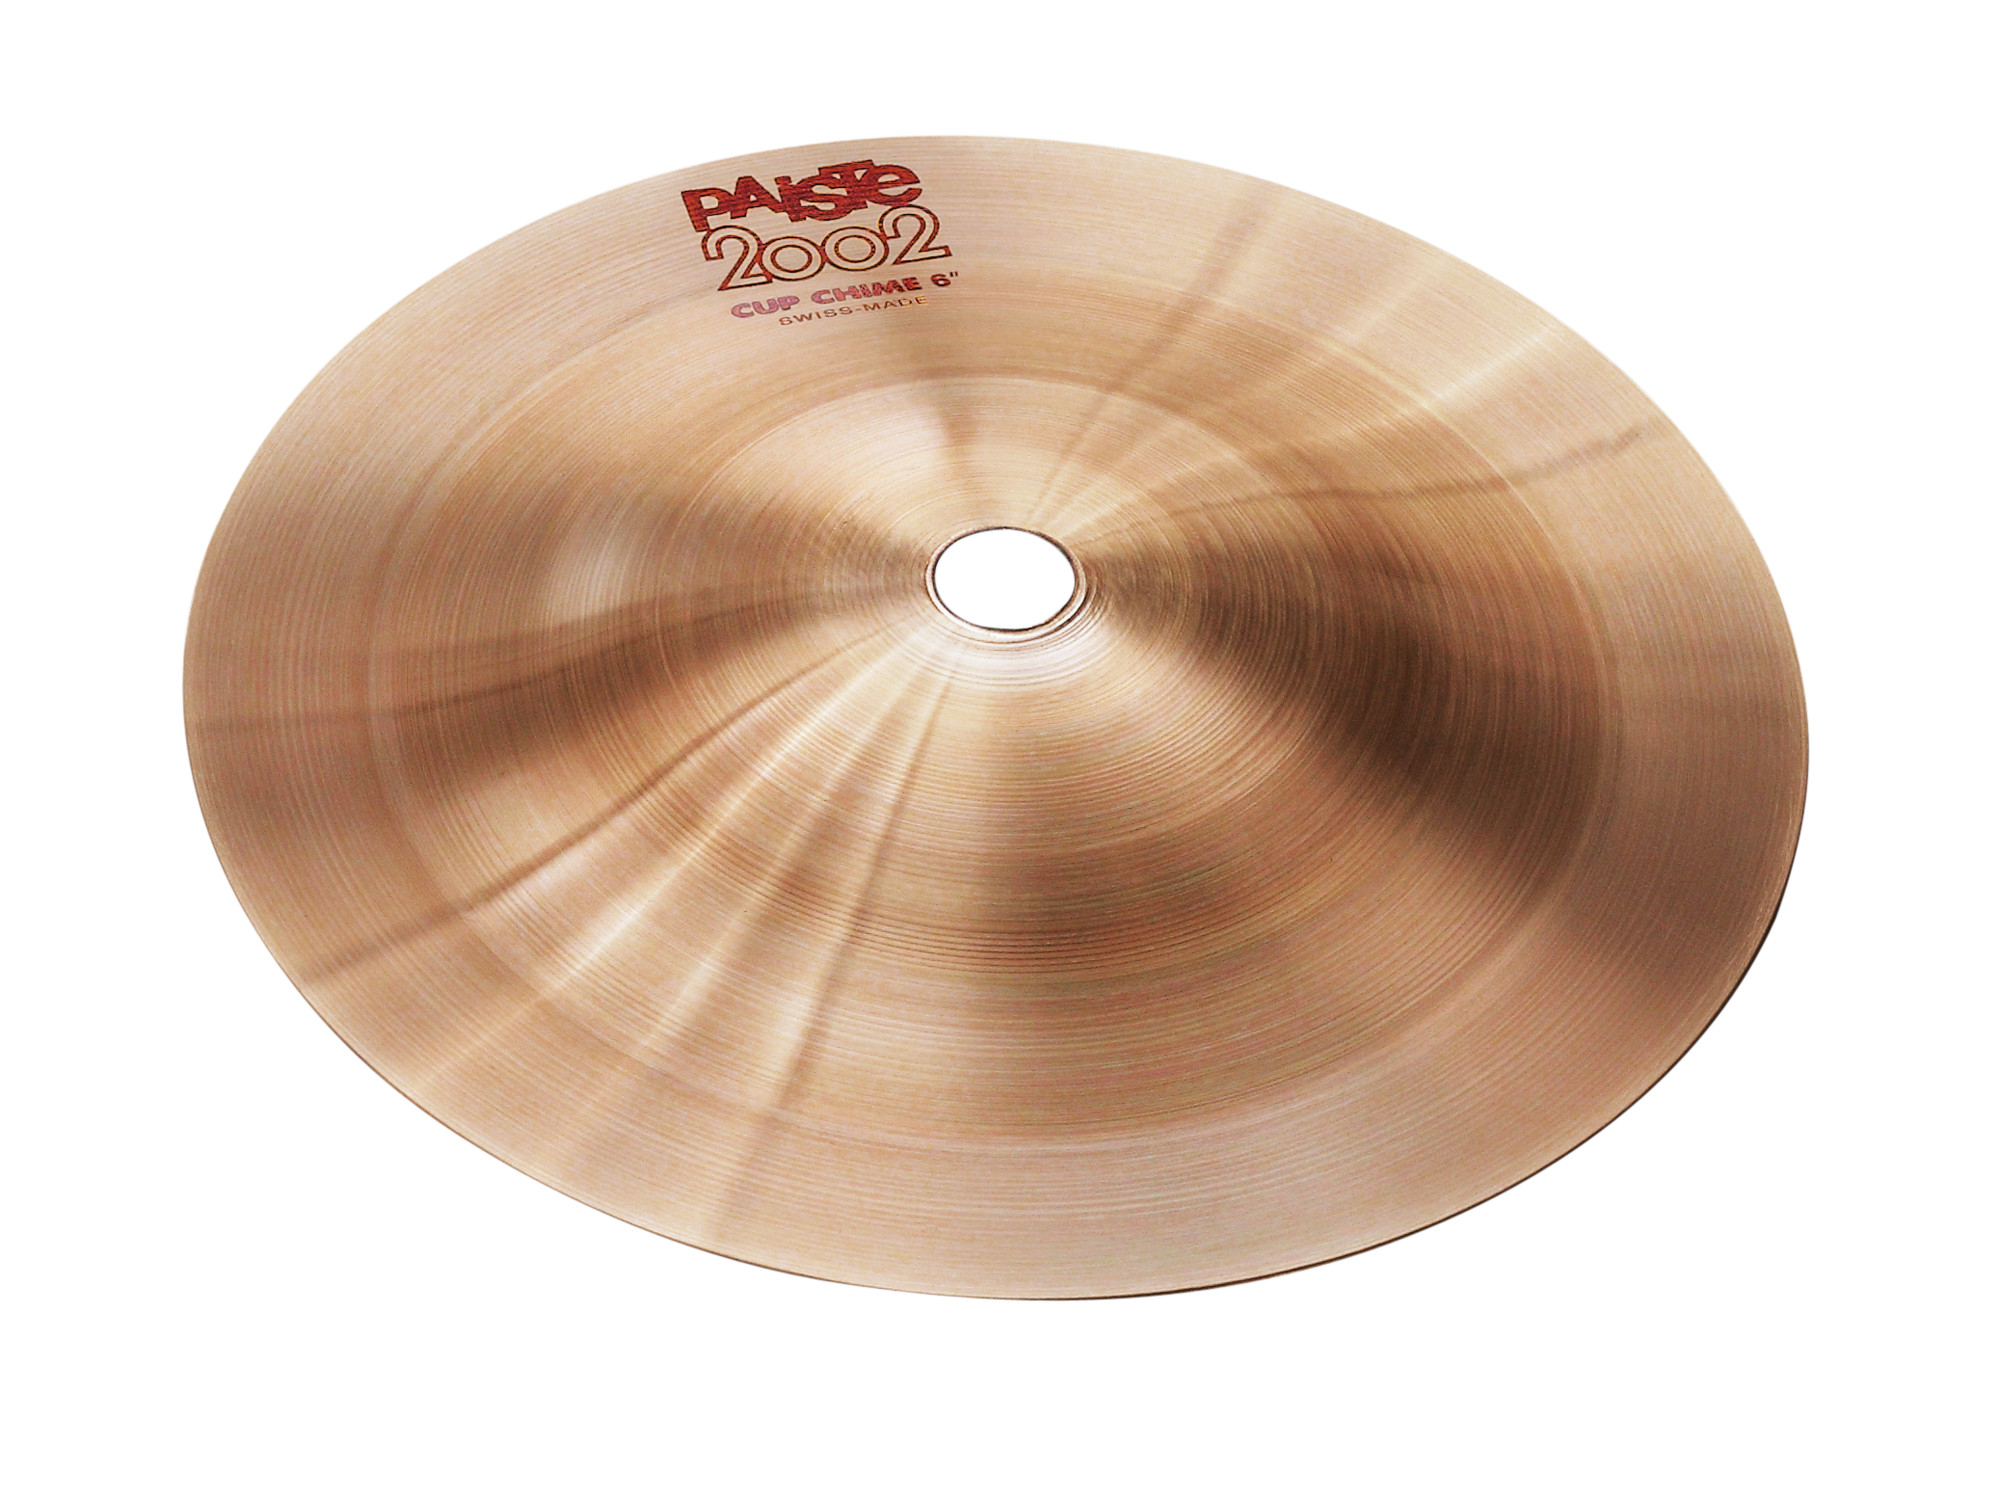 CUP CHIME 6 2002 PAISTE